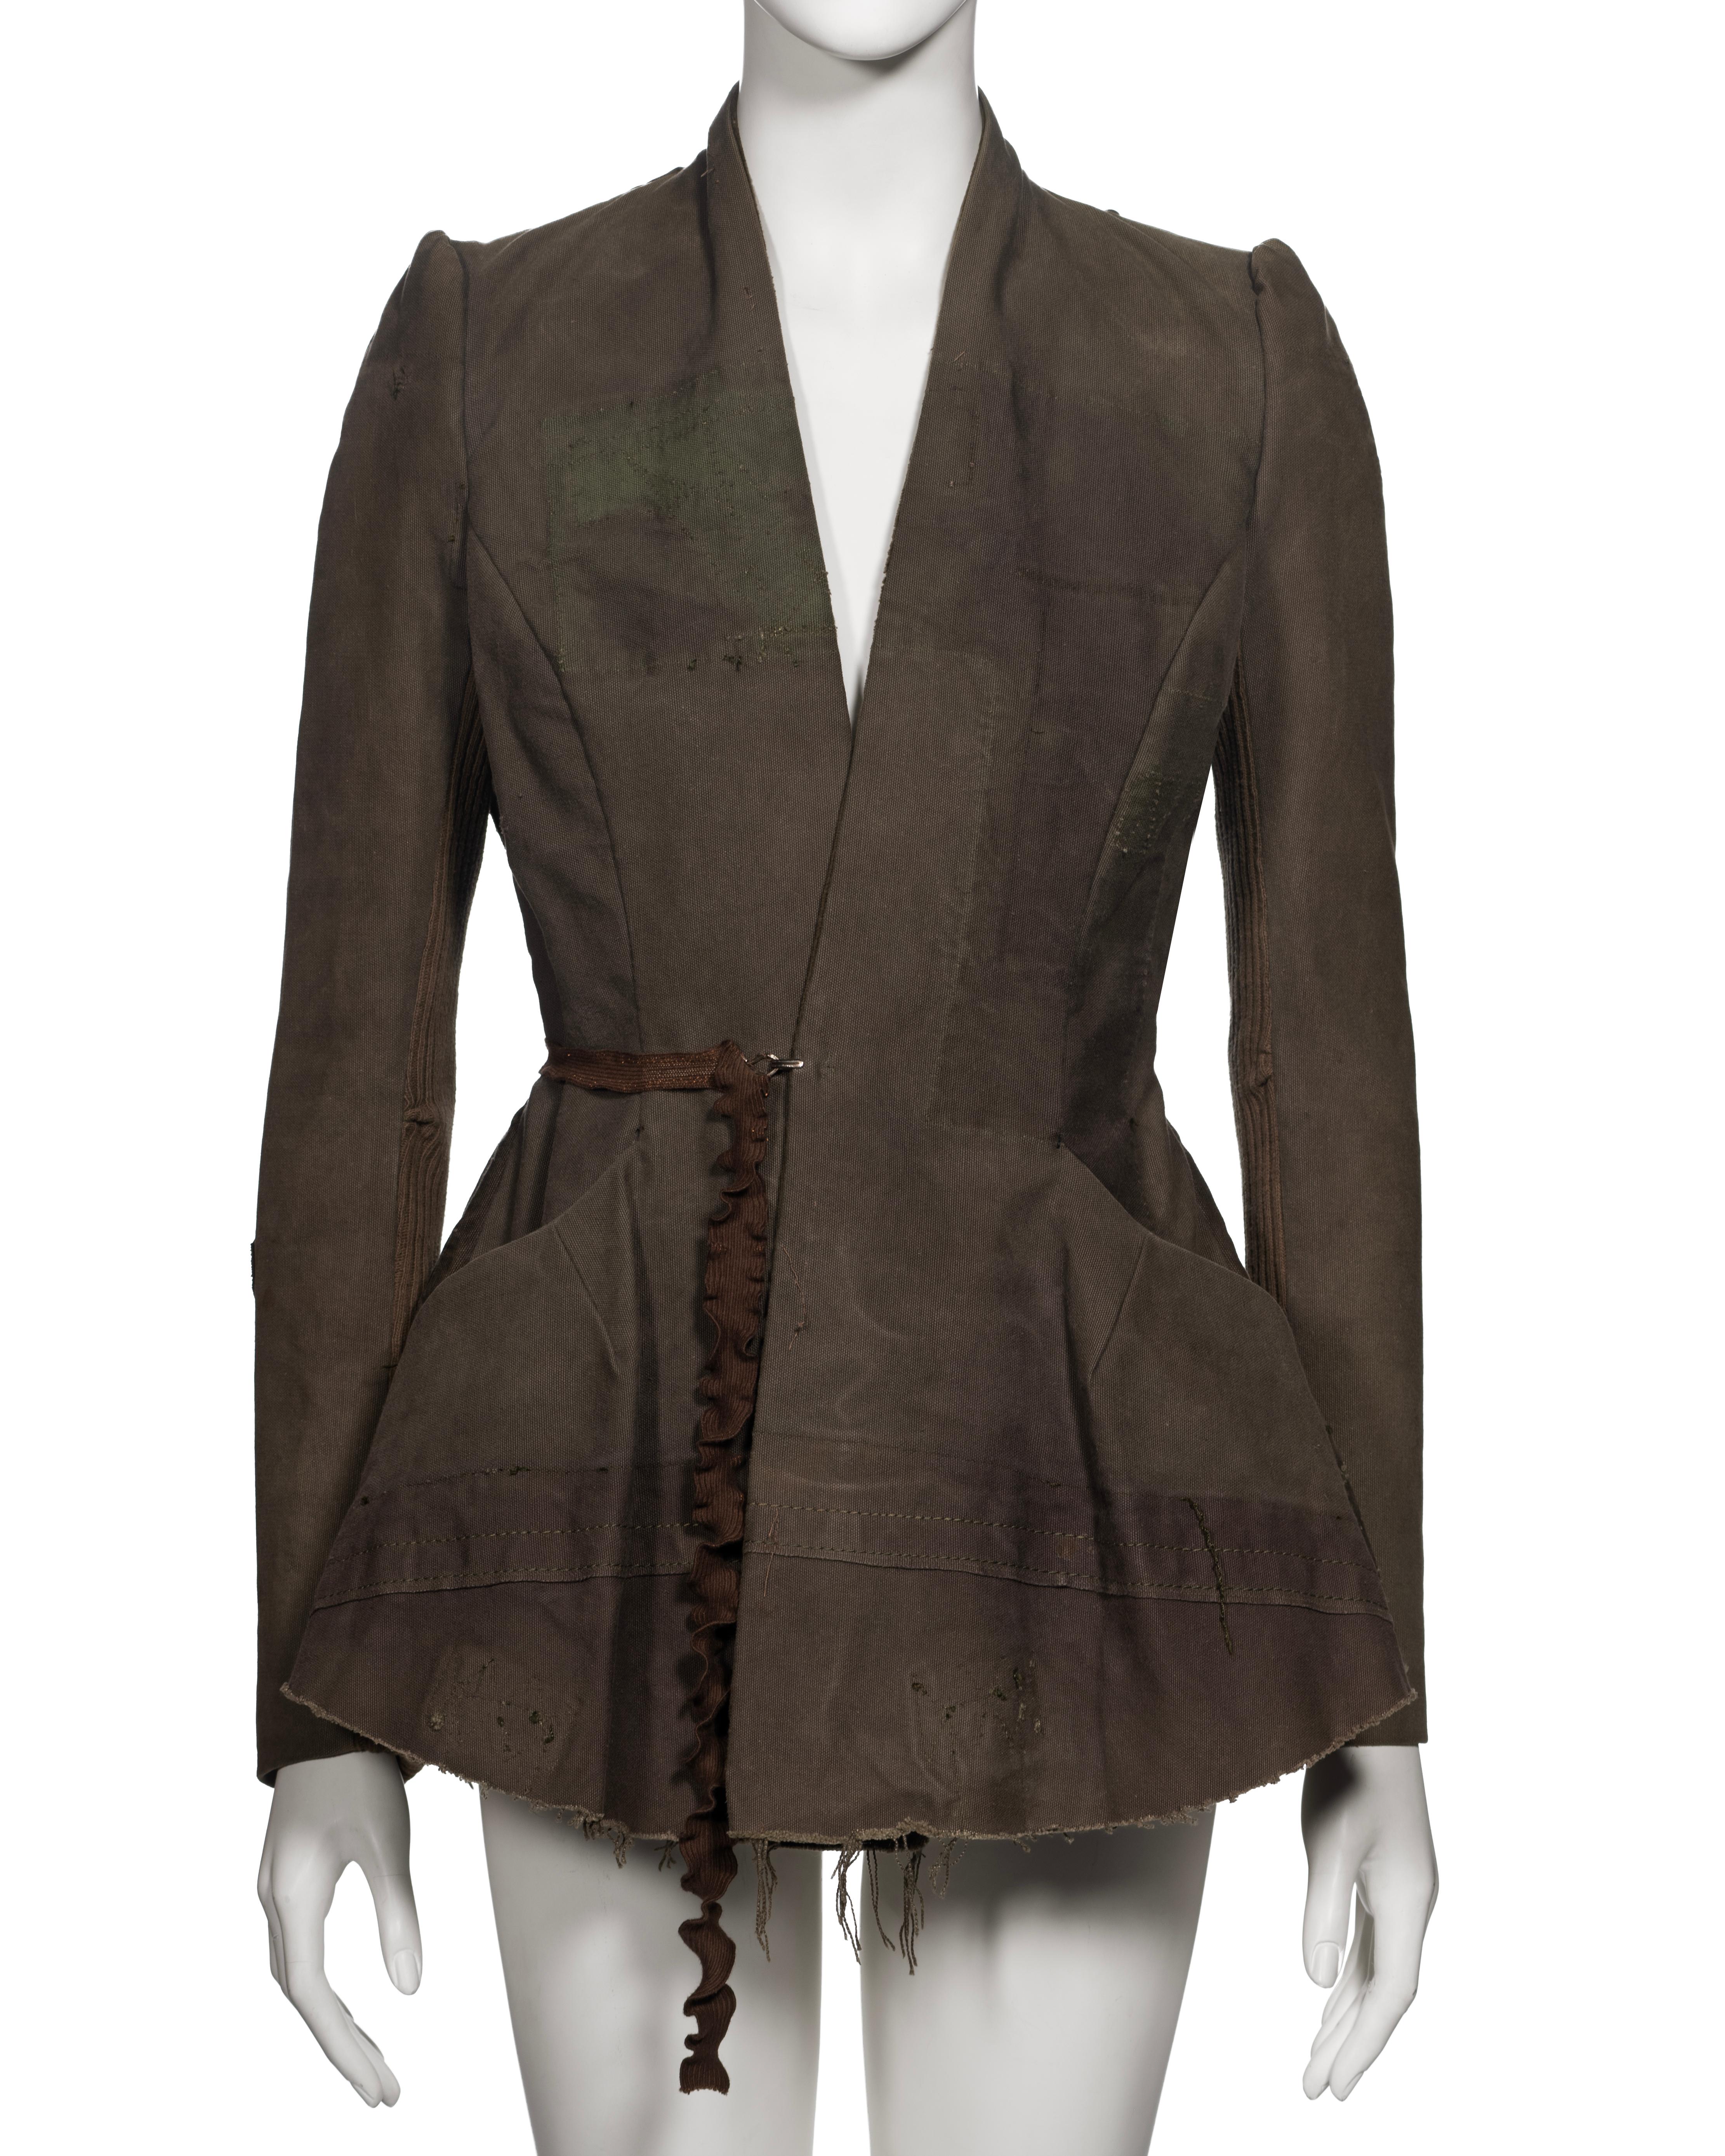 Women's Rick Owens Jacket Made From Deconstructed Military Surplus Bags, c. 1998